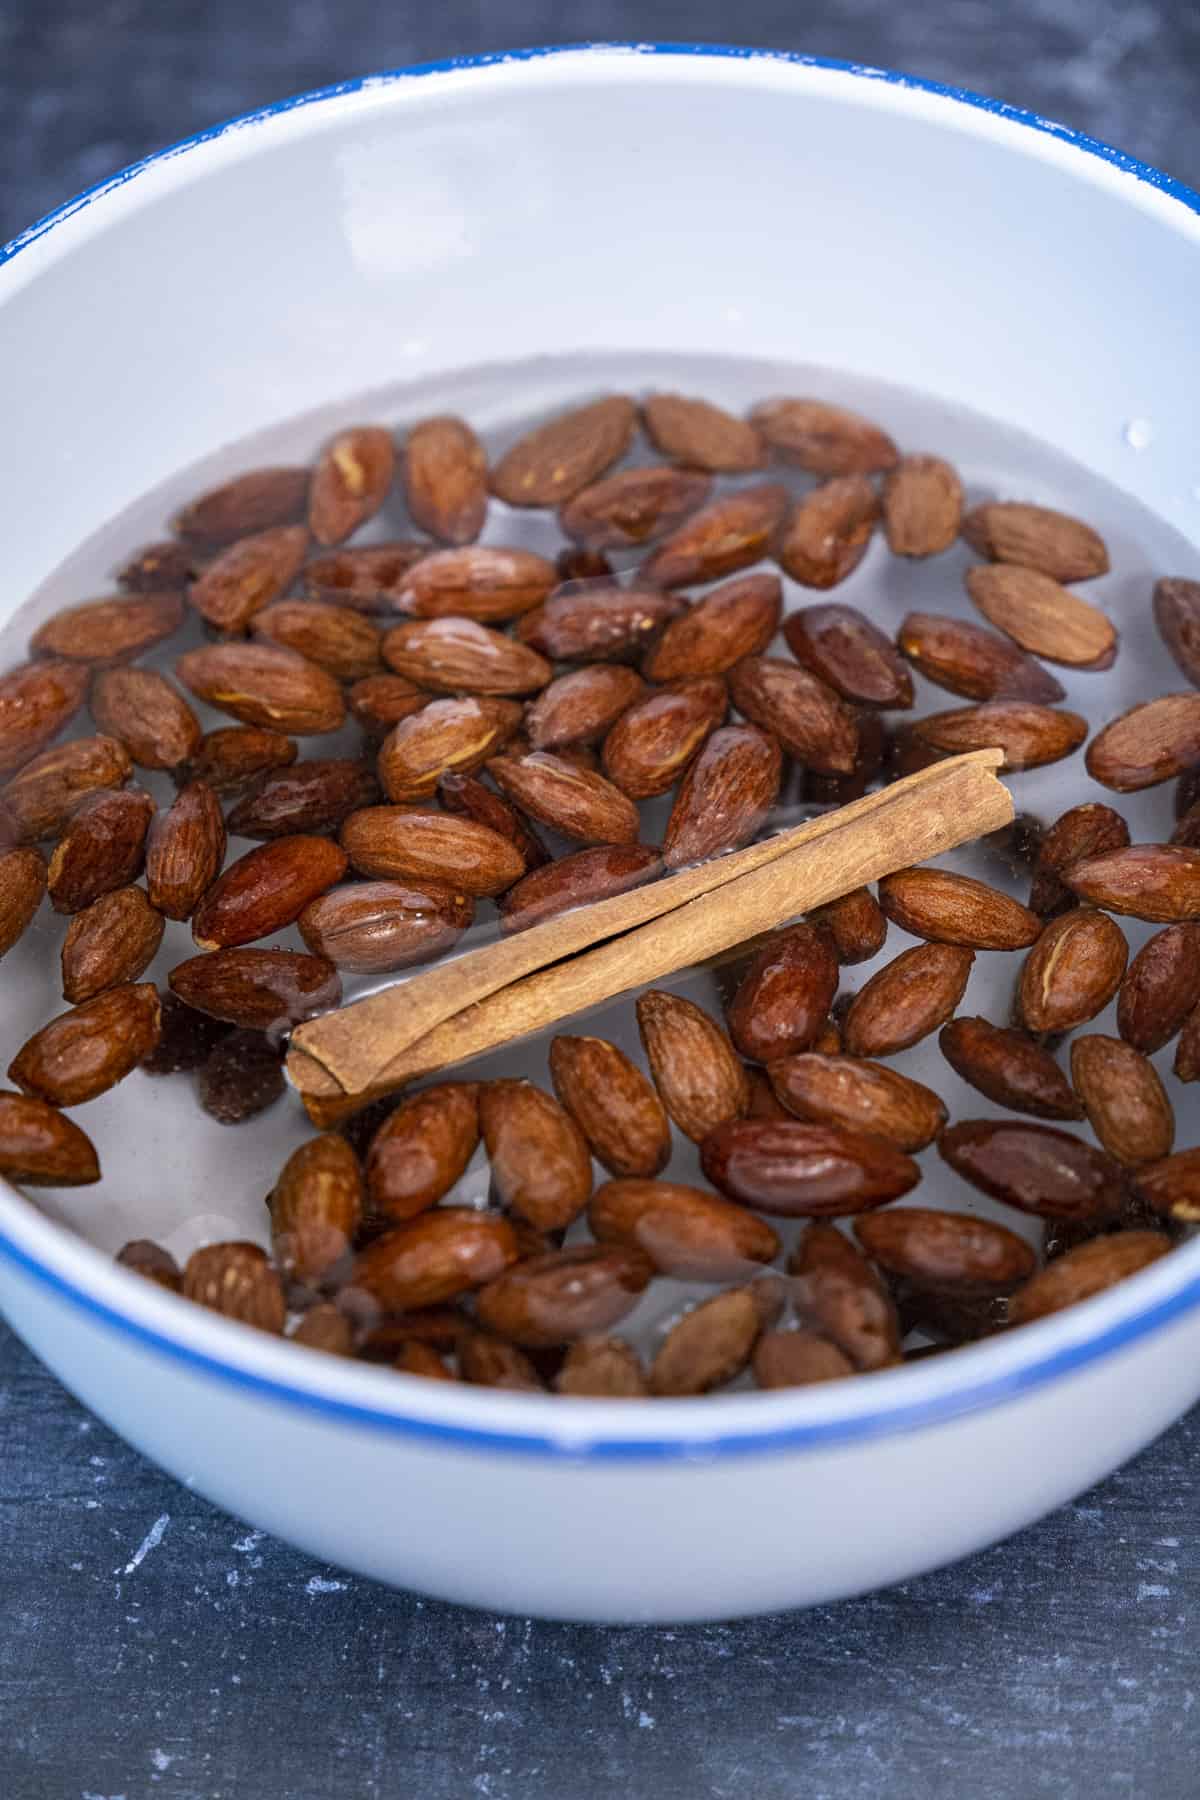 Whole almonds and a cinnamon stick soaked in water in a white bowl.